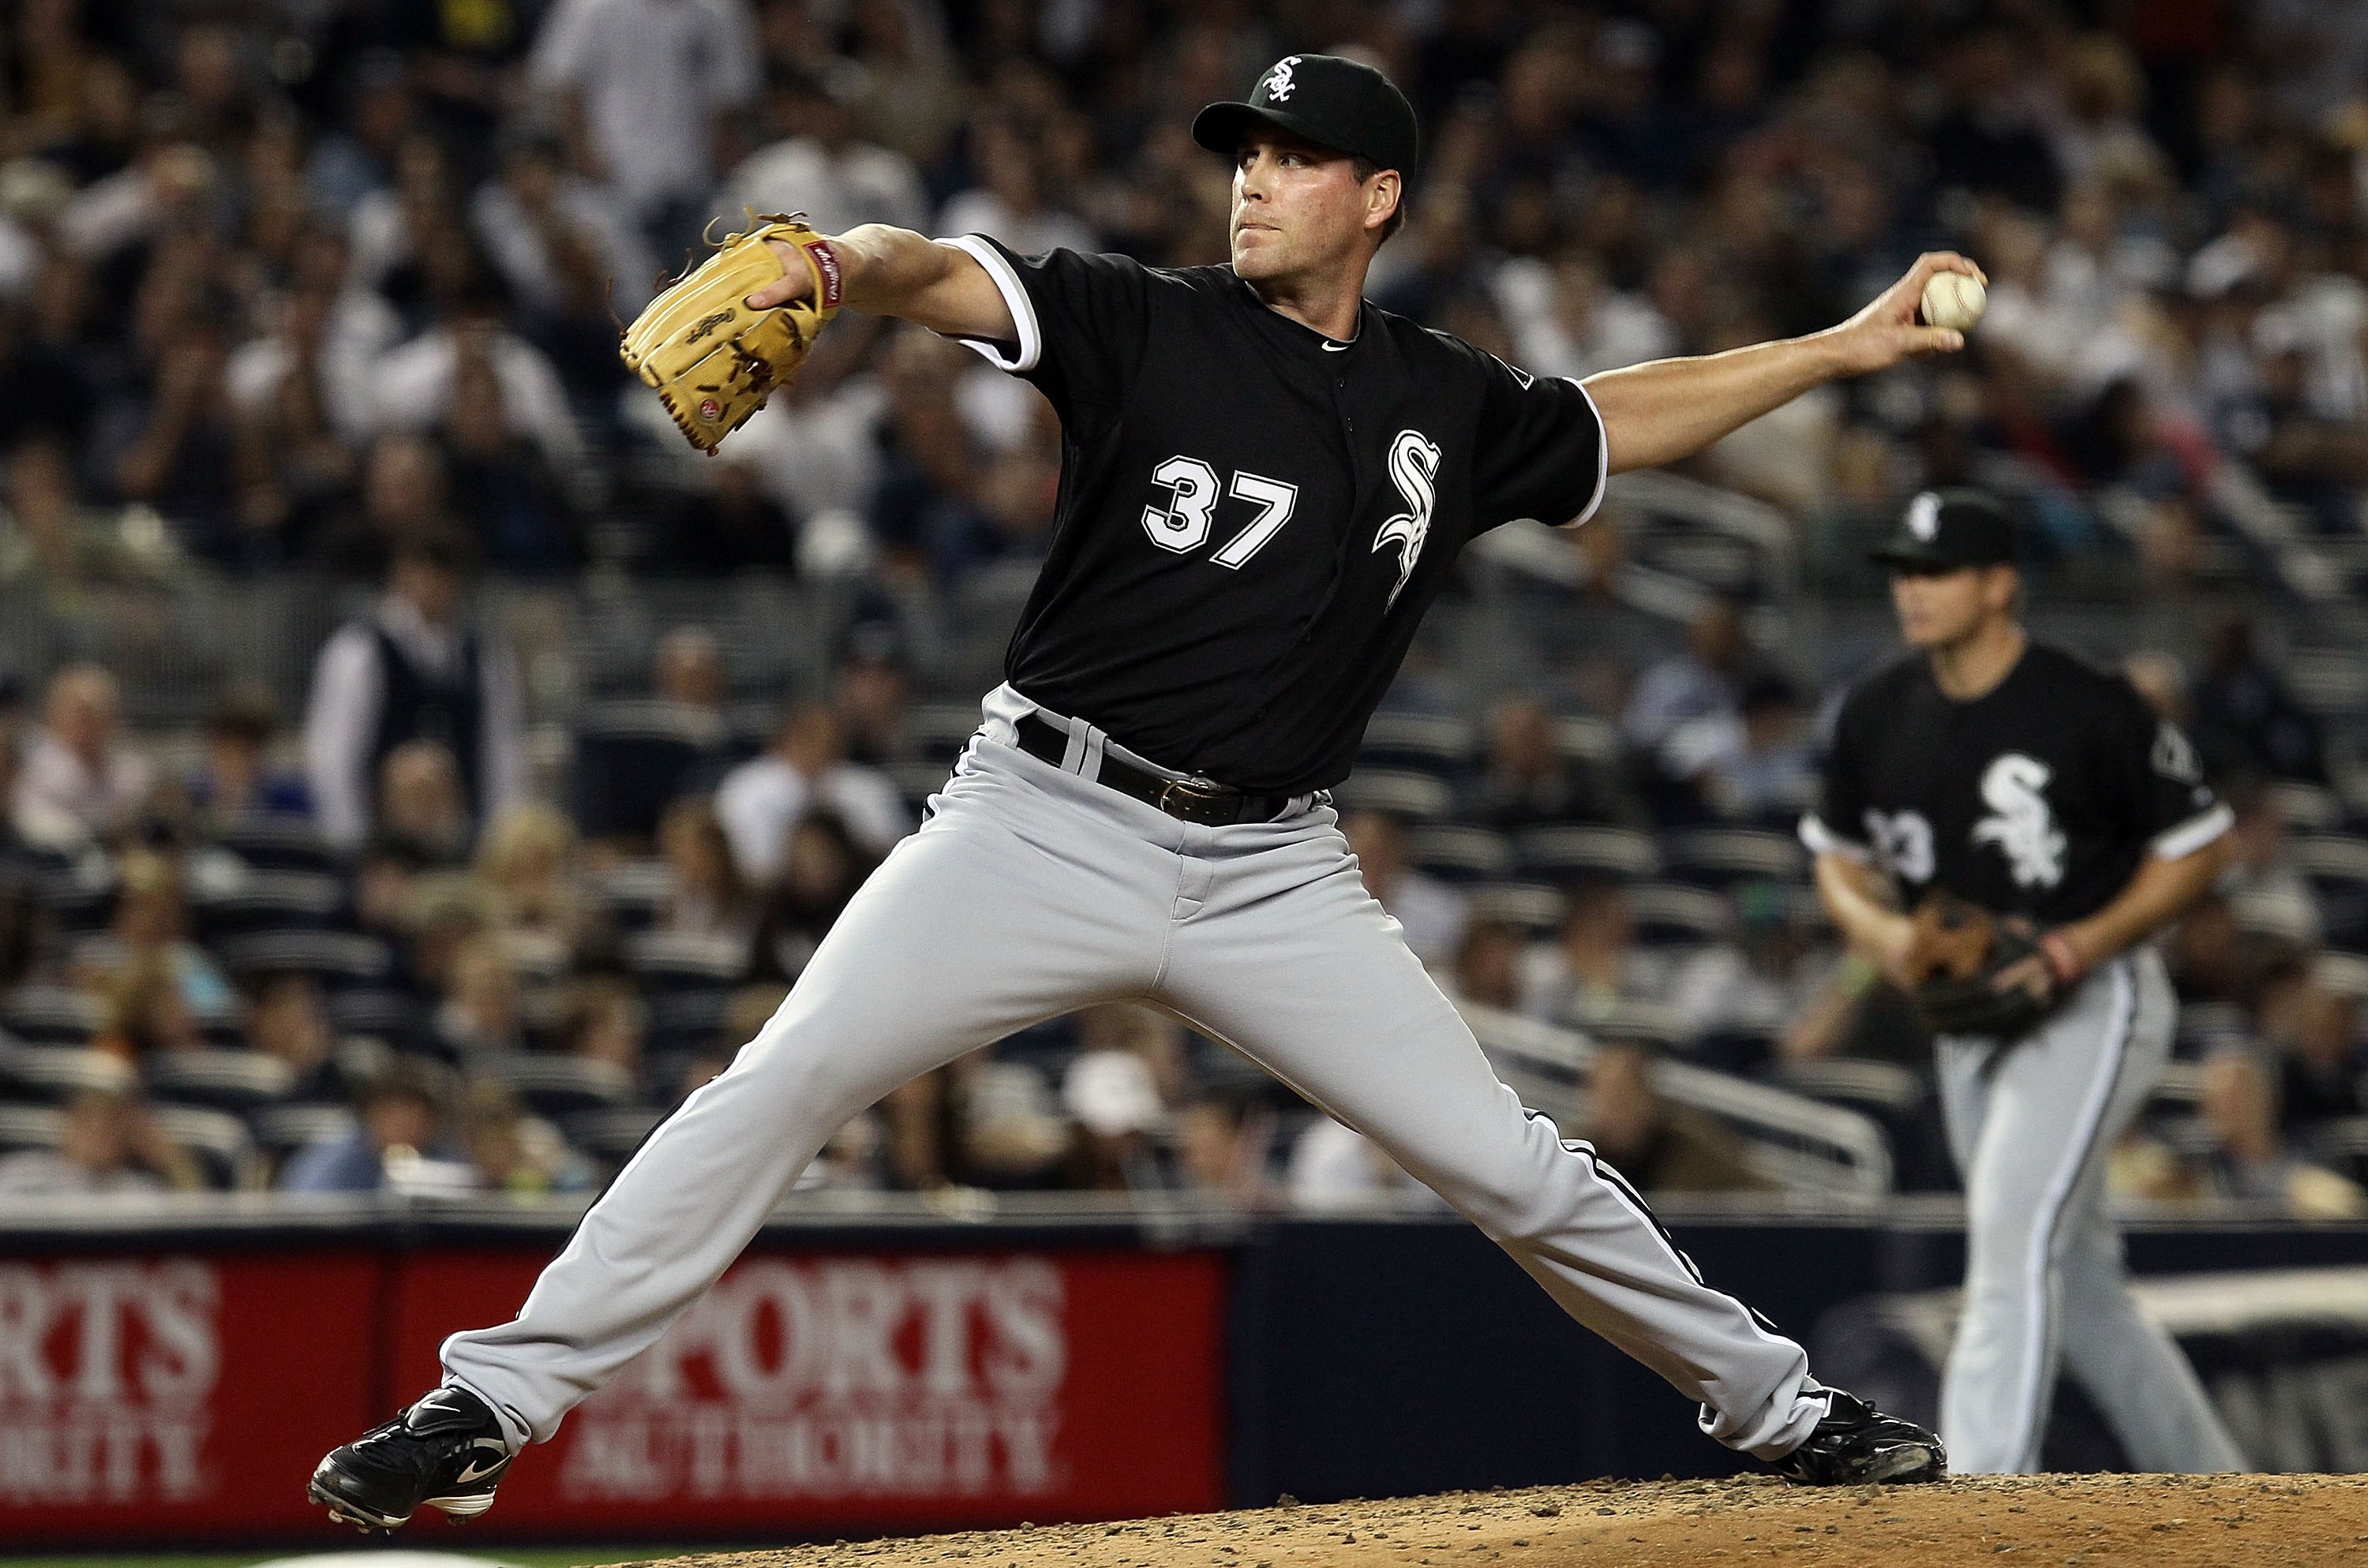 NEW YORK - APRIL 30:  Matt Thornton #37 of the Chicago White Sox pitches against the New York Yankees on April 30, 2010 at Yankee Stadium in the Bronx borough of New York City.  (Photo by Jim McIsaac/Getty Images)